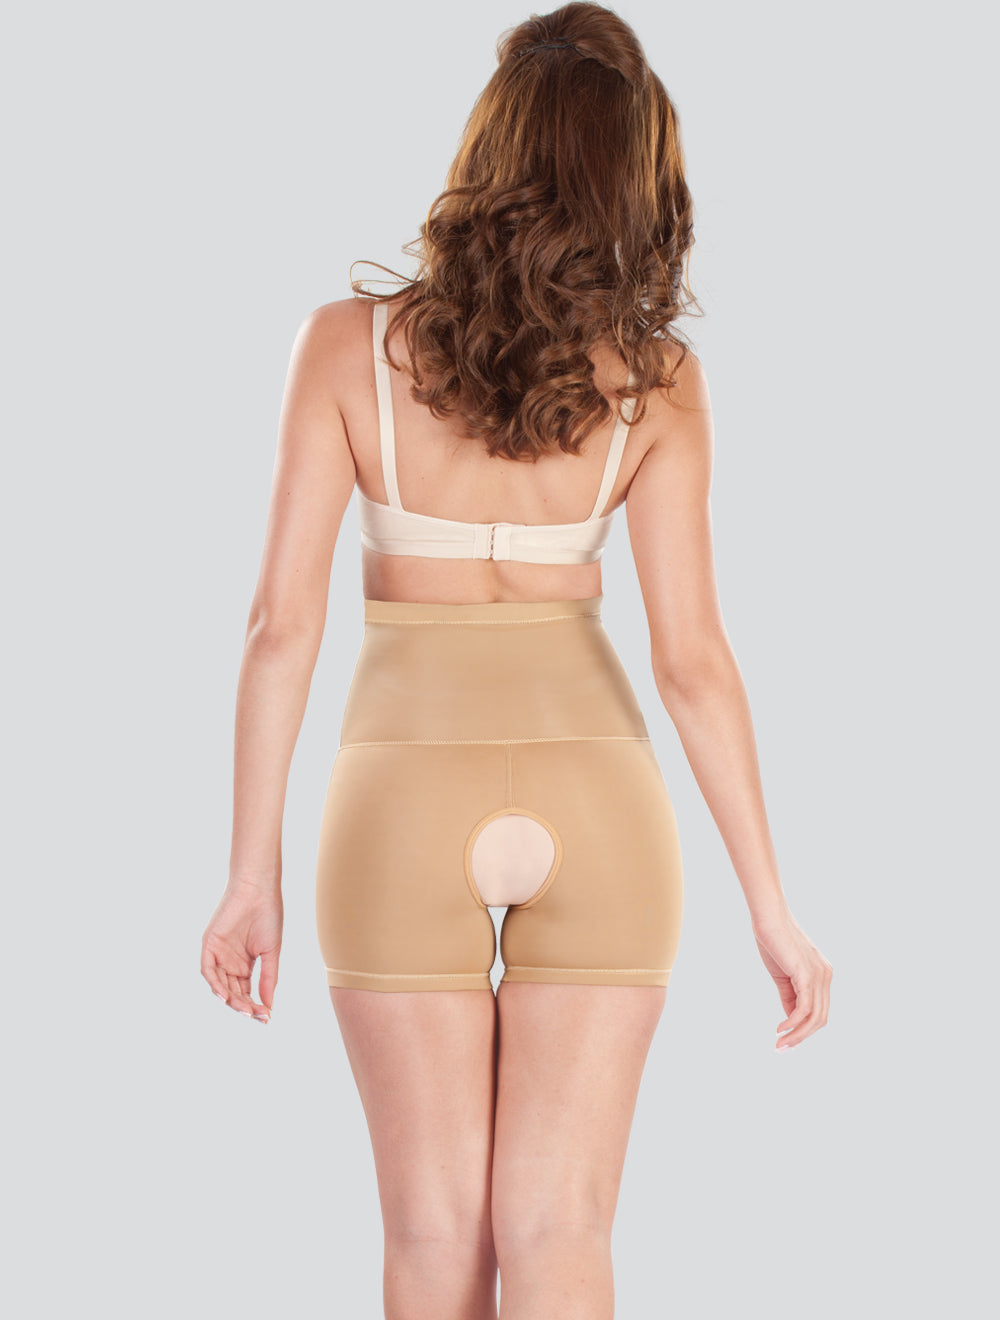 Dermawear Shapewear on Instagram: Elevate your stunning looks in your  gorgeous outfits by adding the magic of Dermawear Slimmer 2.0 Full Body  Shapewear. Shop yours now on www.dermawear.co.in #ShapeYourFuture  #SculptingLives #Confidence #FitInAbit #